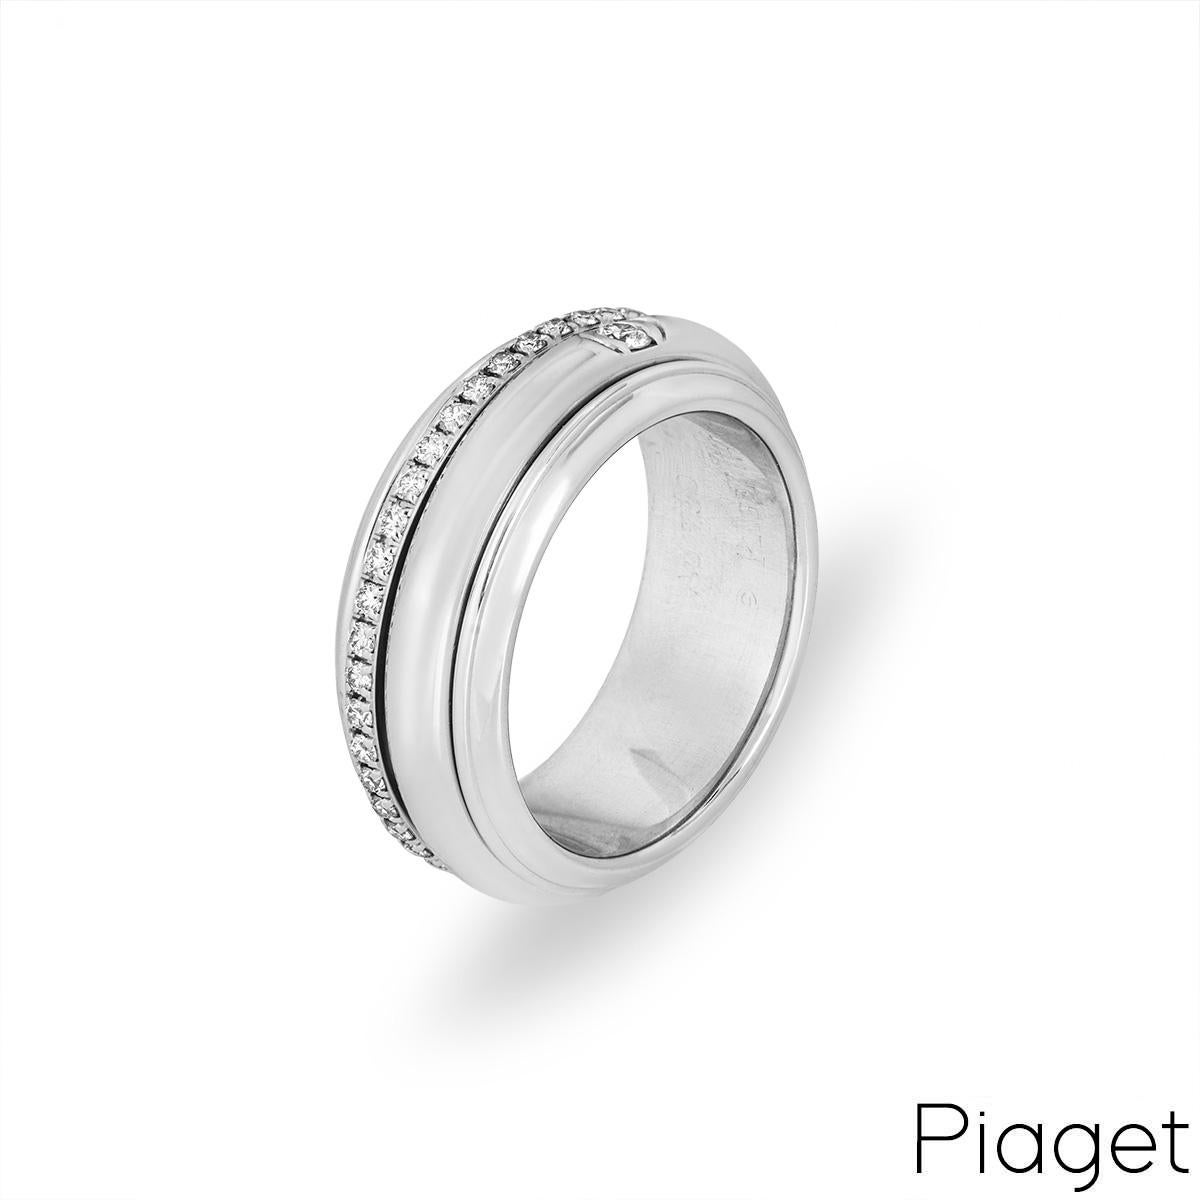 An 18k white gold diamond set ring by Piaget from the Possession collection. The 8mm band is set with two spinning bands between bevelled edges. The first band is half bezel set with a single round brilliant cut diamond and the second is pave set